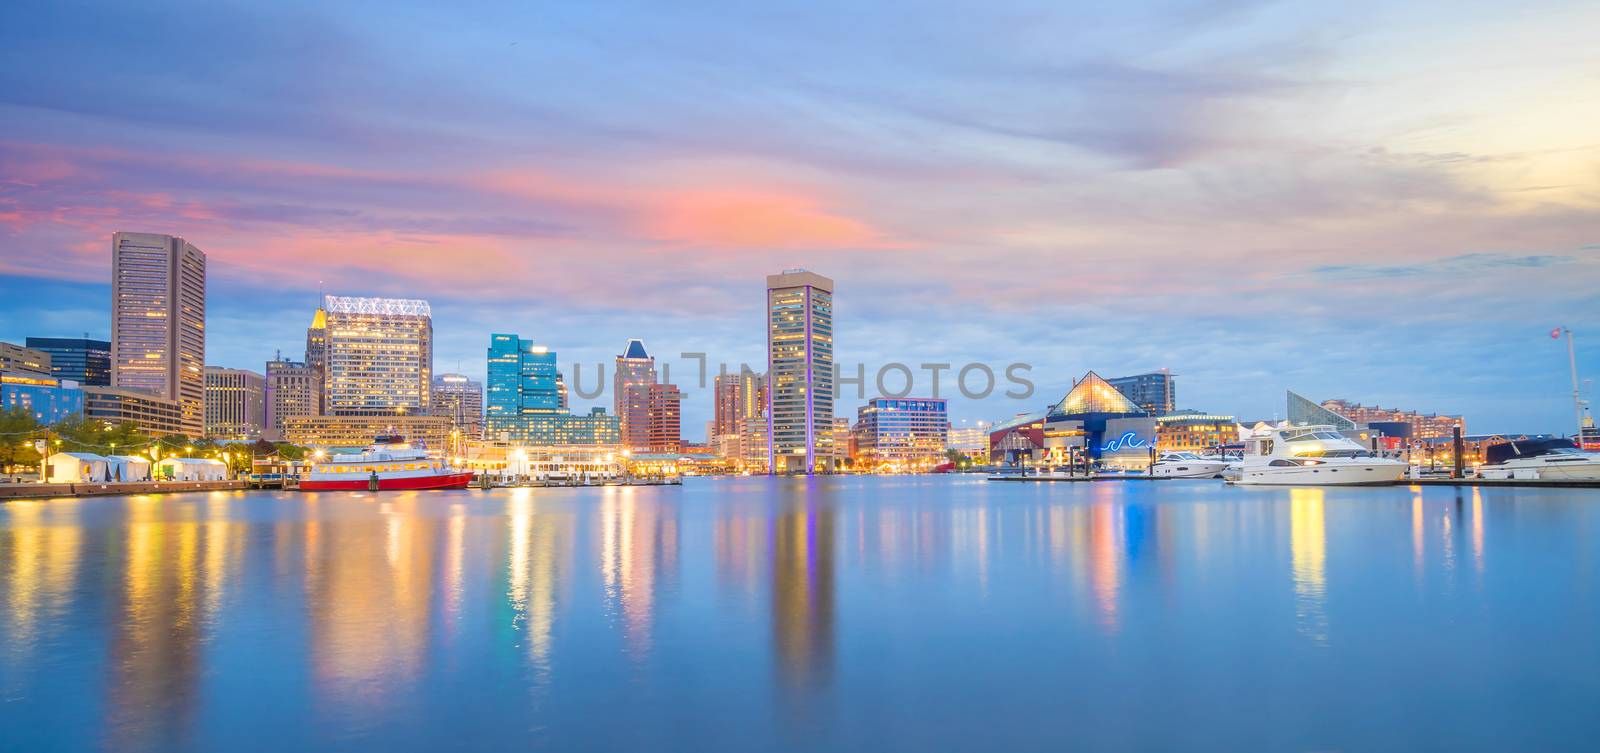 View of Inner Harbor area in downtown Baltimore Maryland USA by f11photo